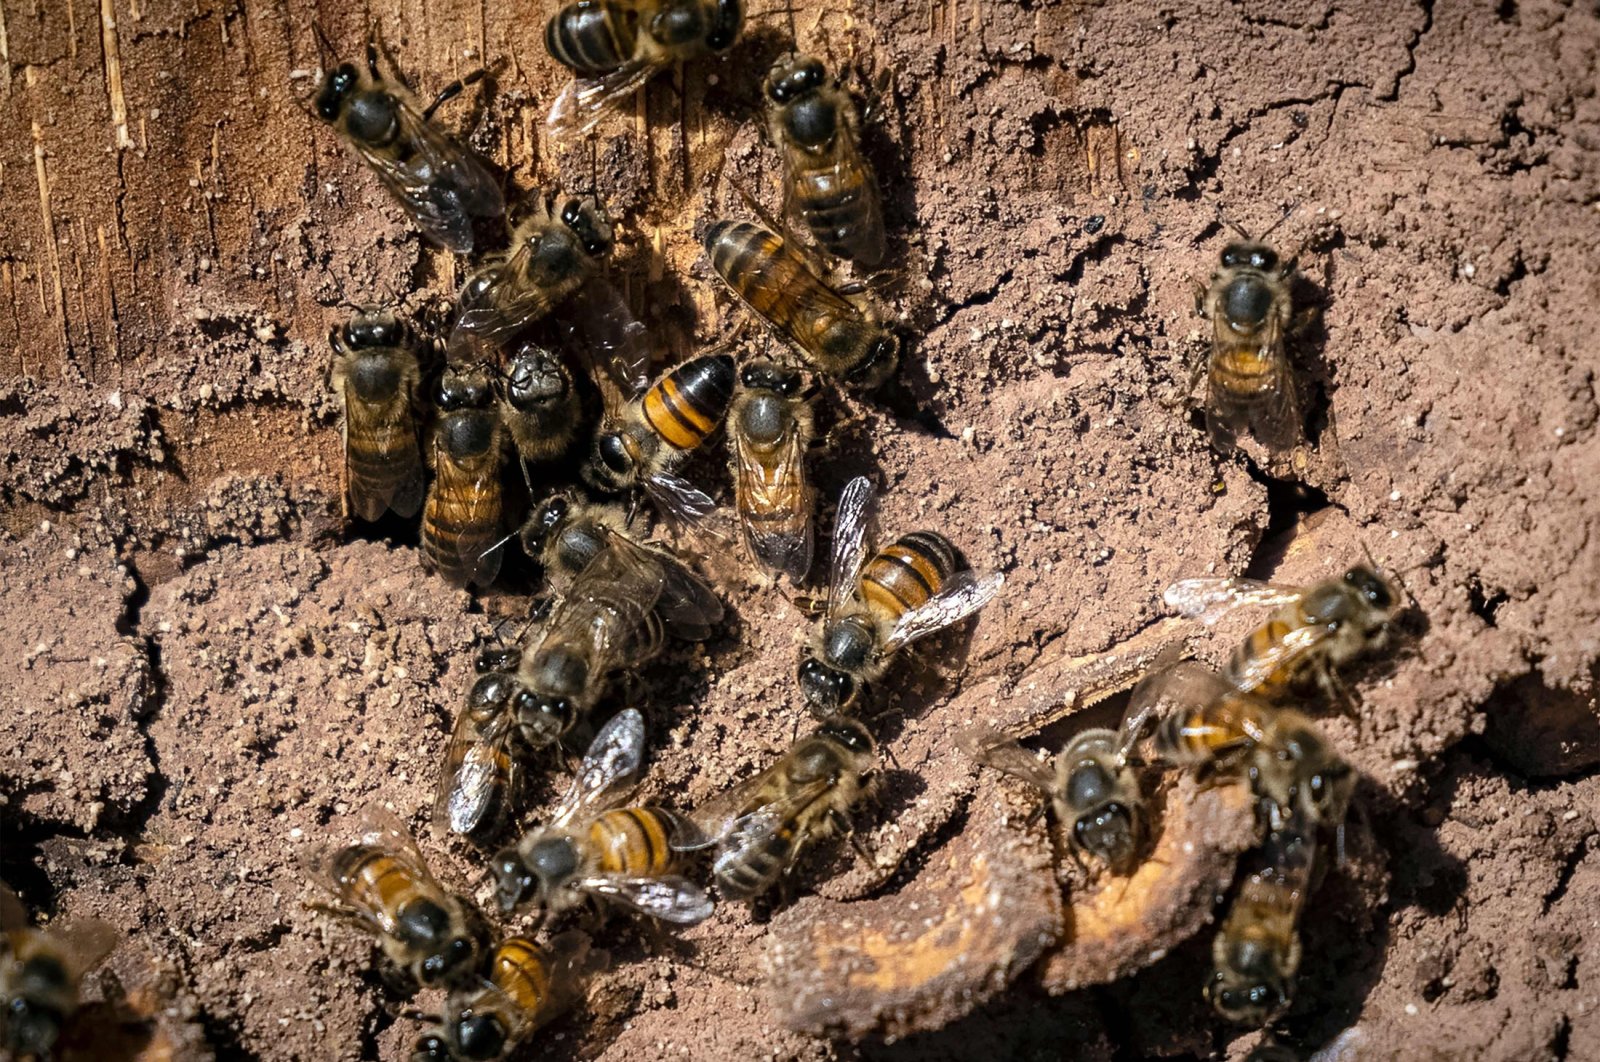 Bees can be seen at the Inzerki Apiary in the village of Inzerki, at a hillside in the heart of the Arganeraie Biosphere Reserve, southwest of the capital Rabat, Morocco, Feb. 18, 2022. (AFP Photo)